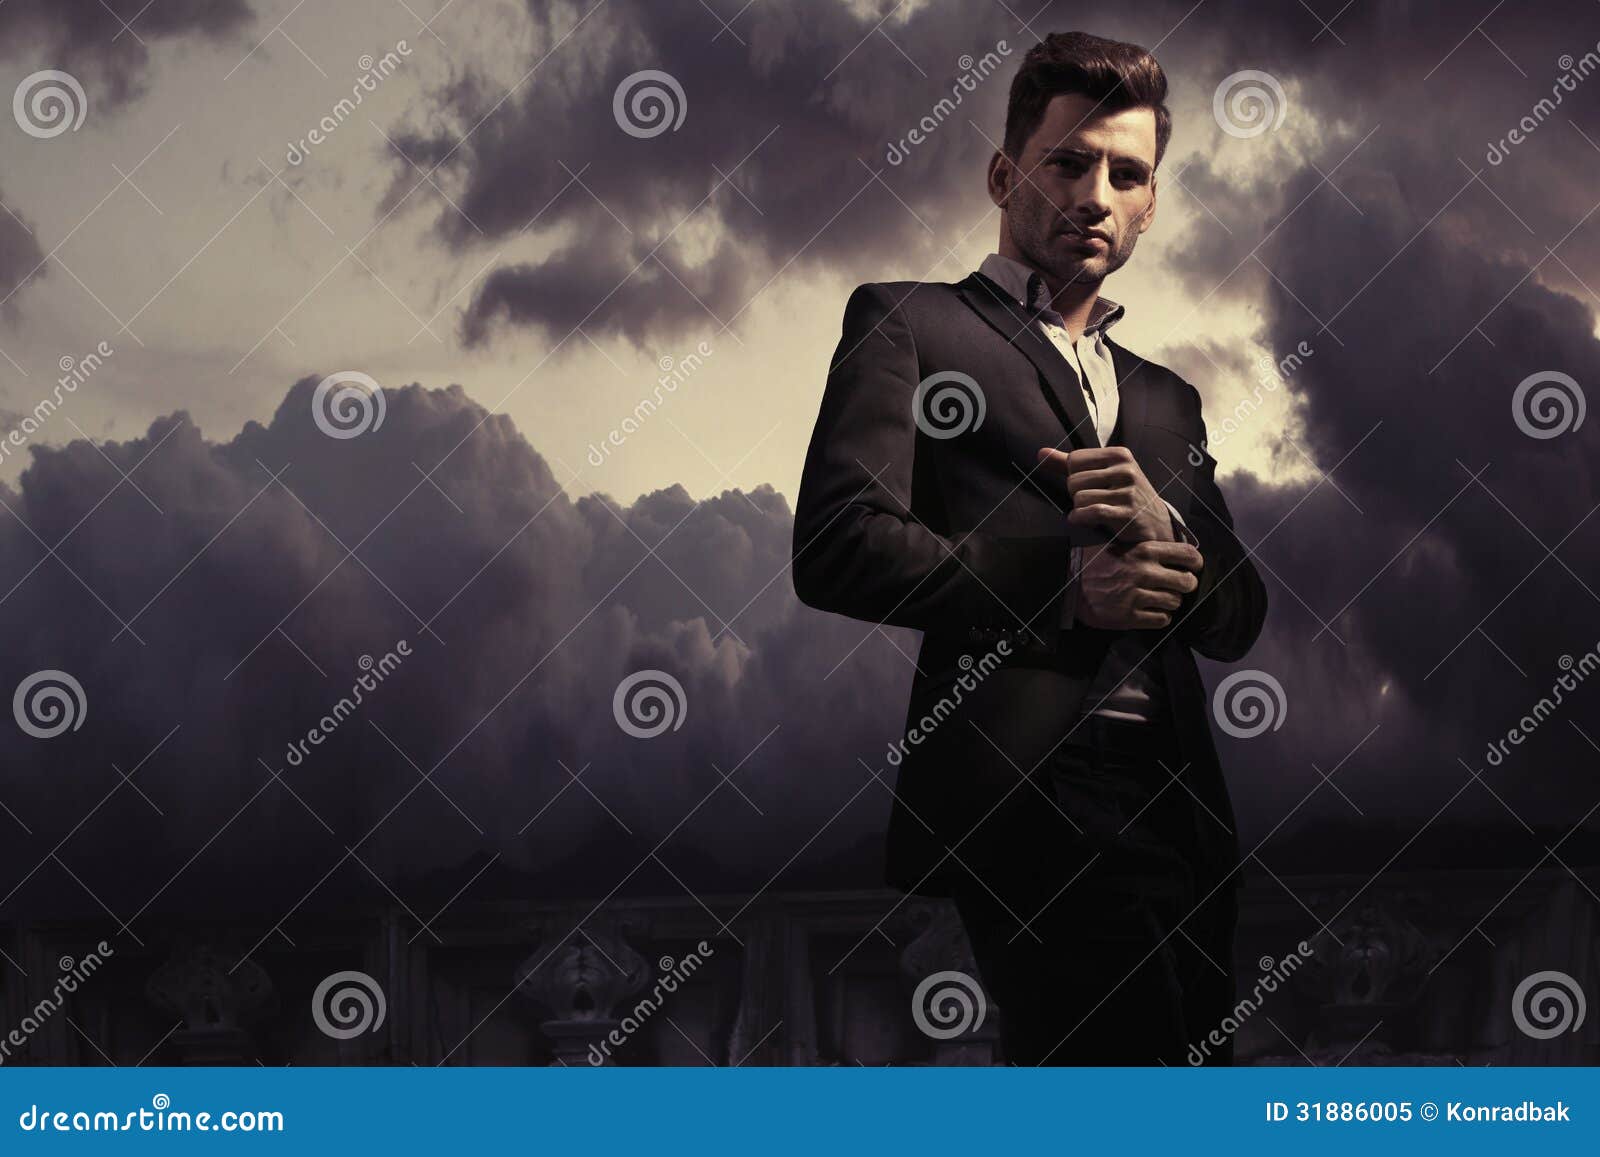 fantasy fashion style photo of a handsome man